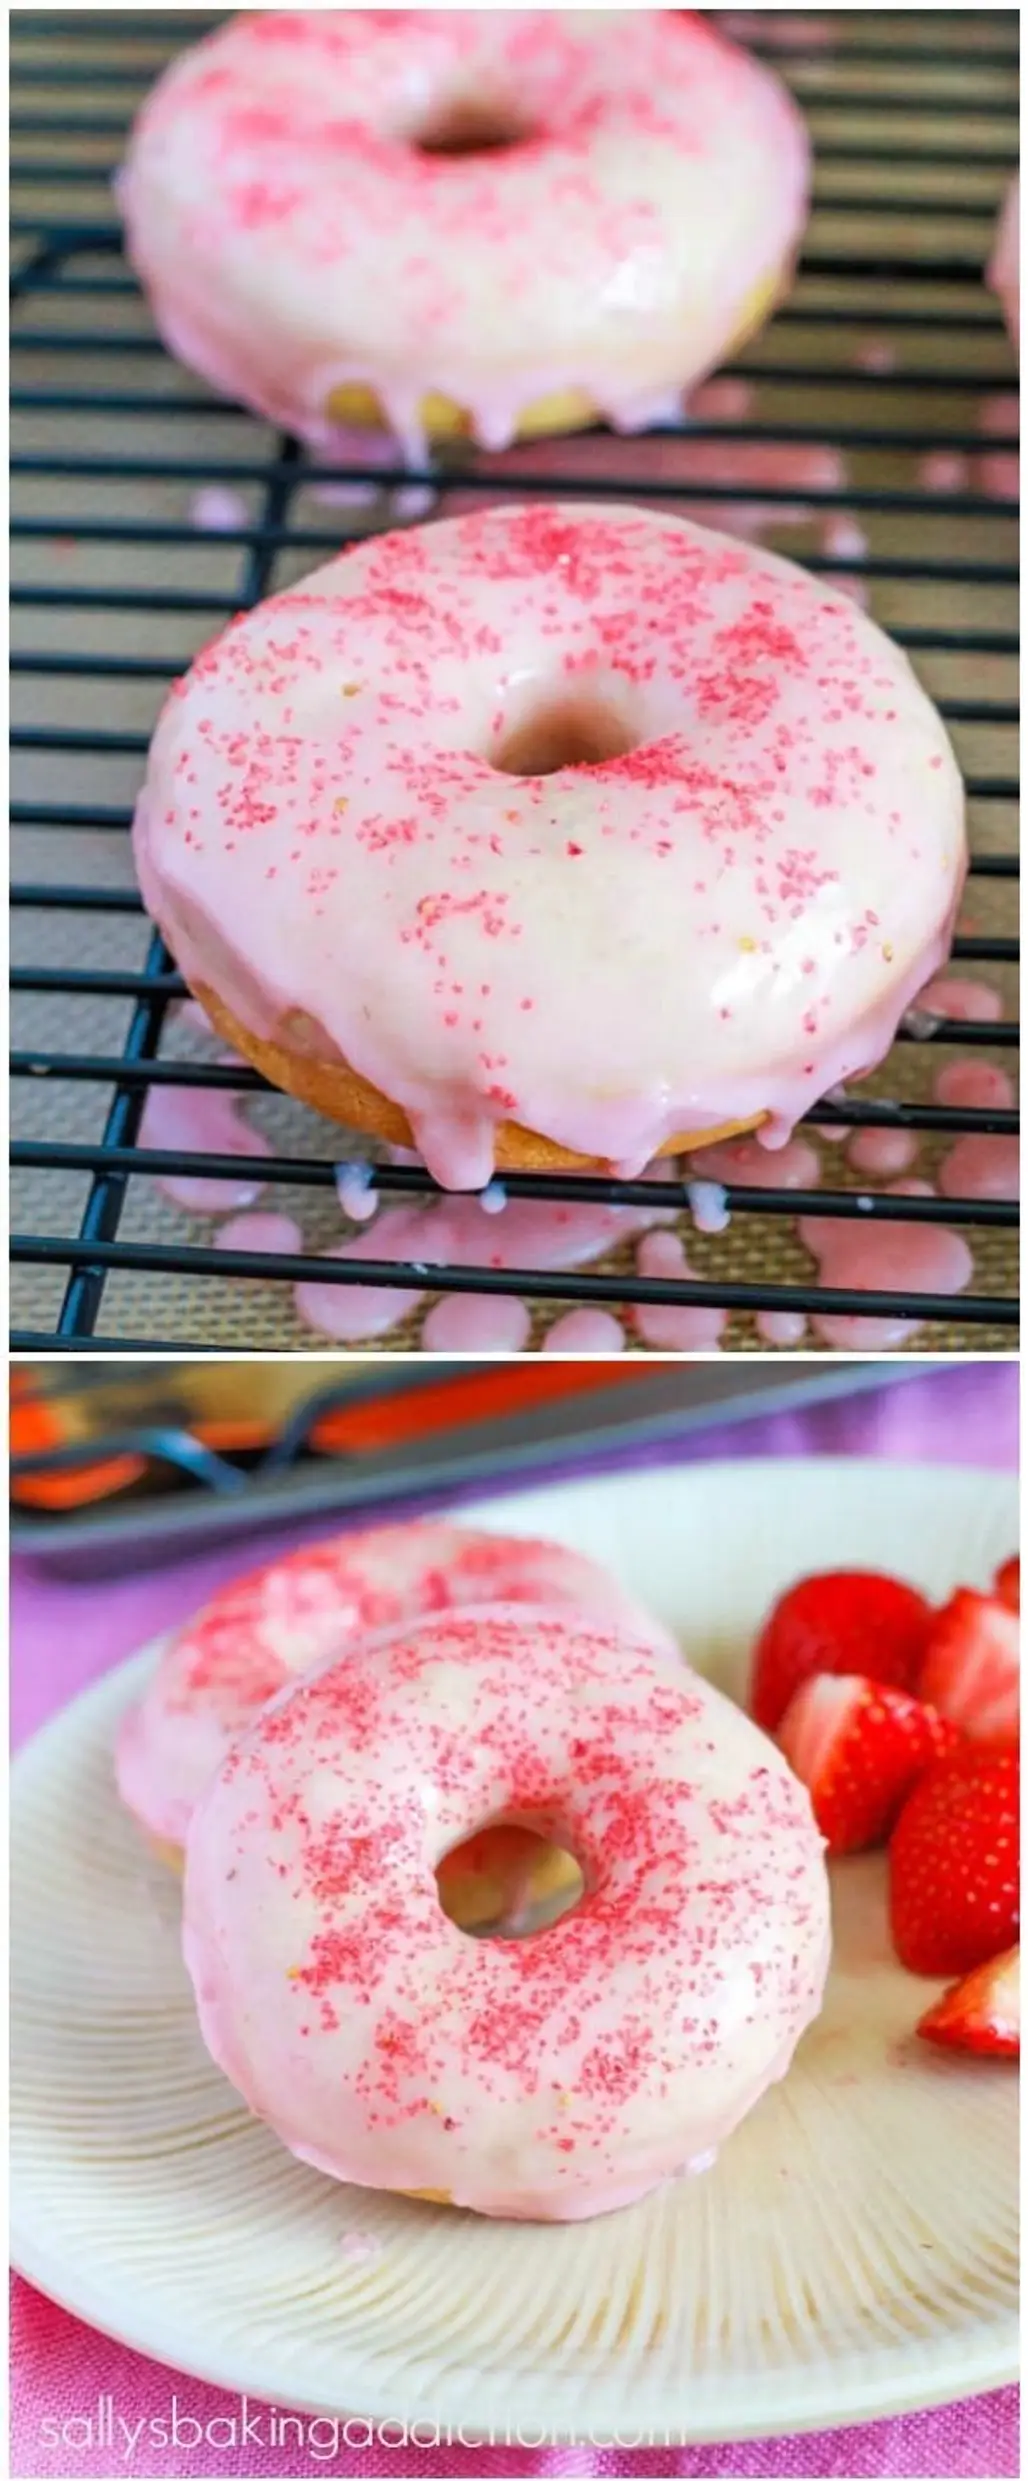 Homemade Strawberry Frosted Donuts